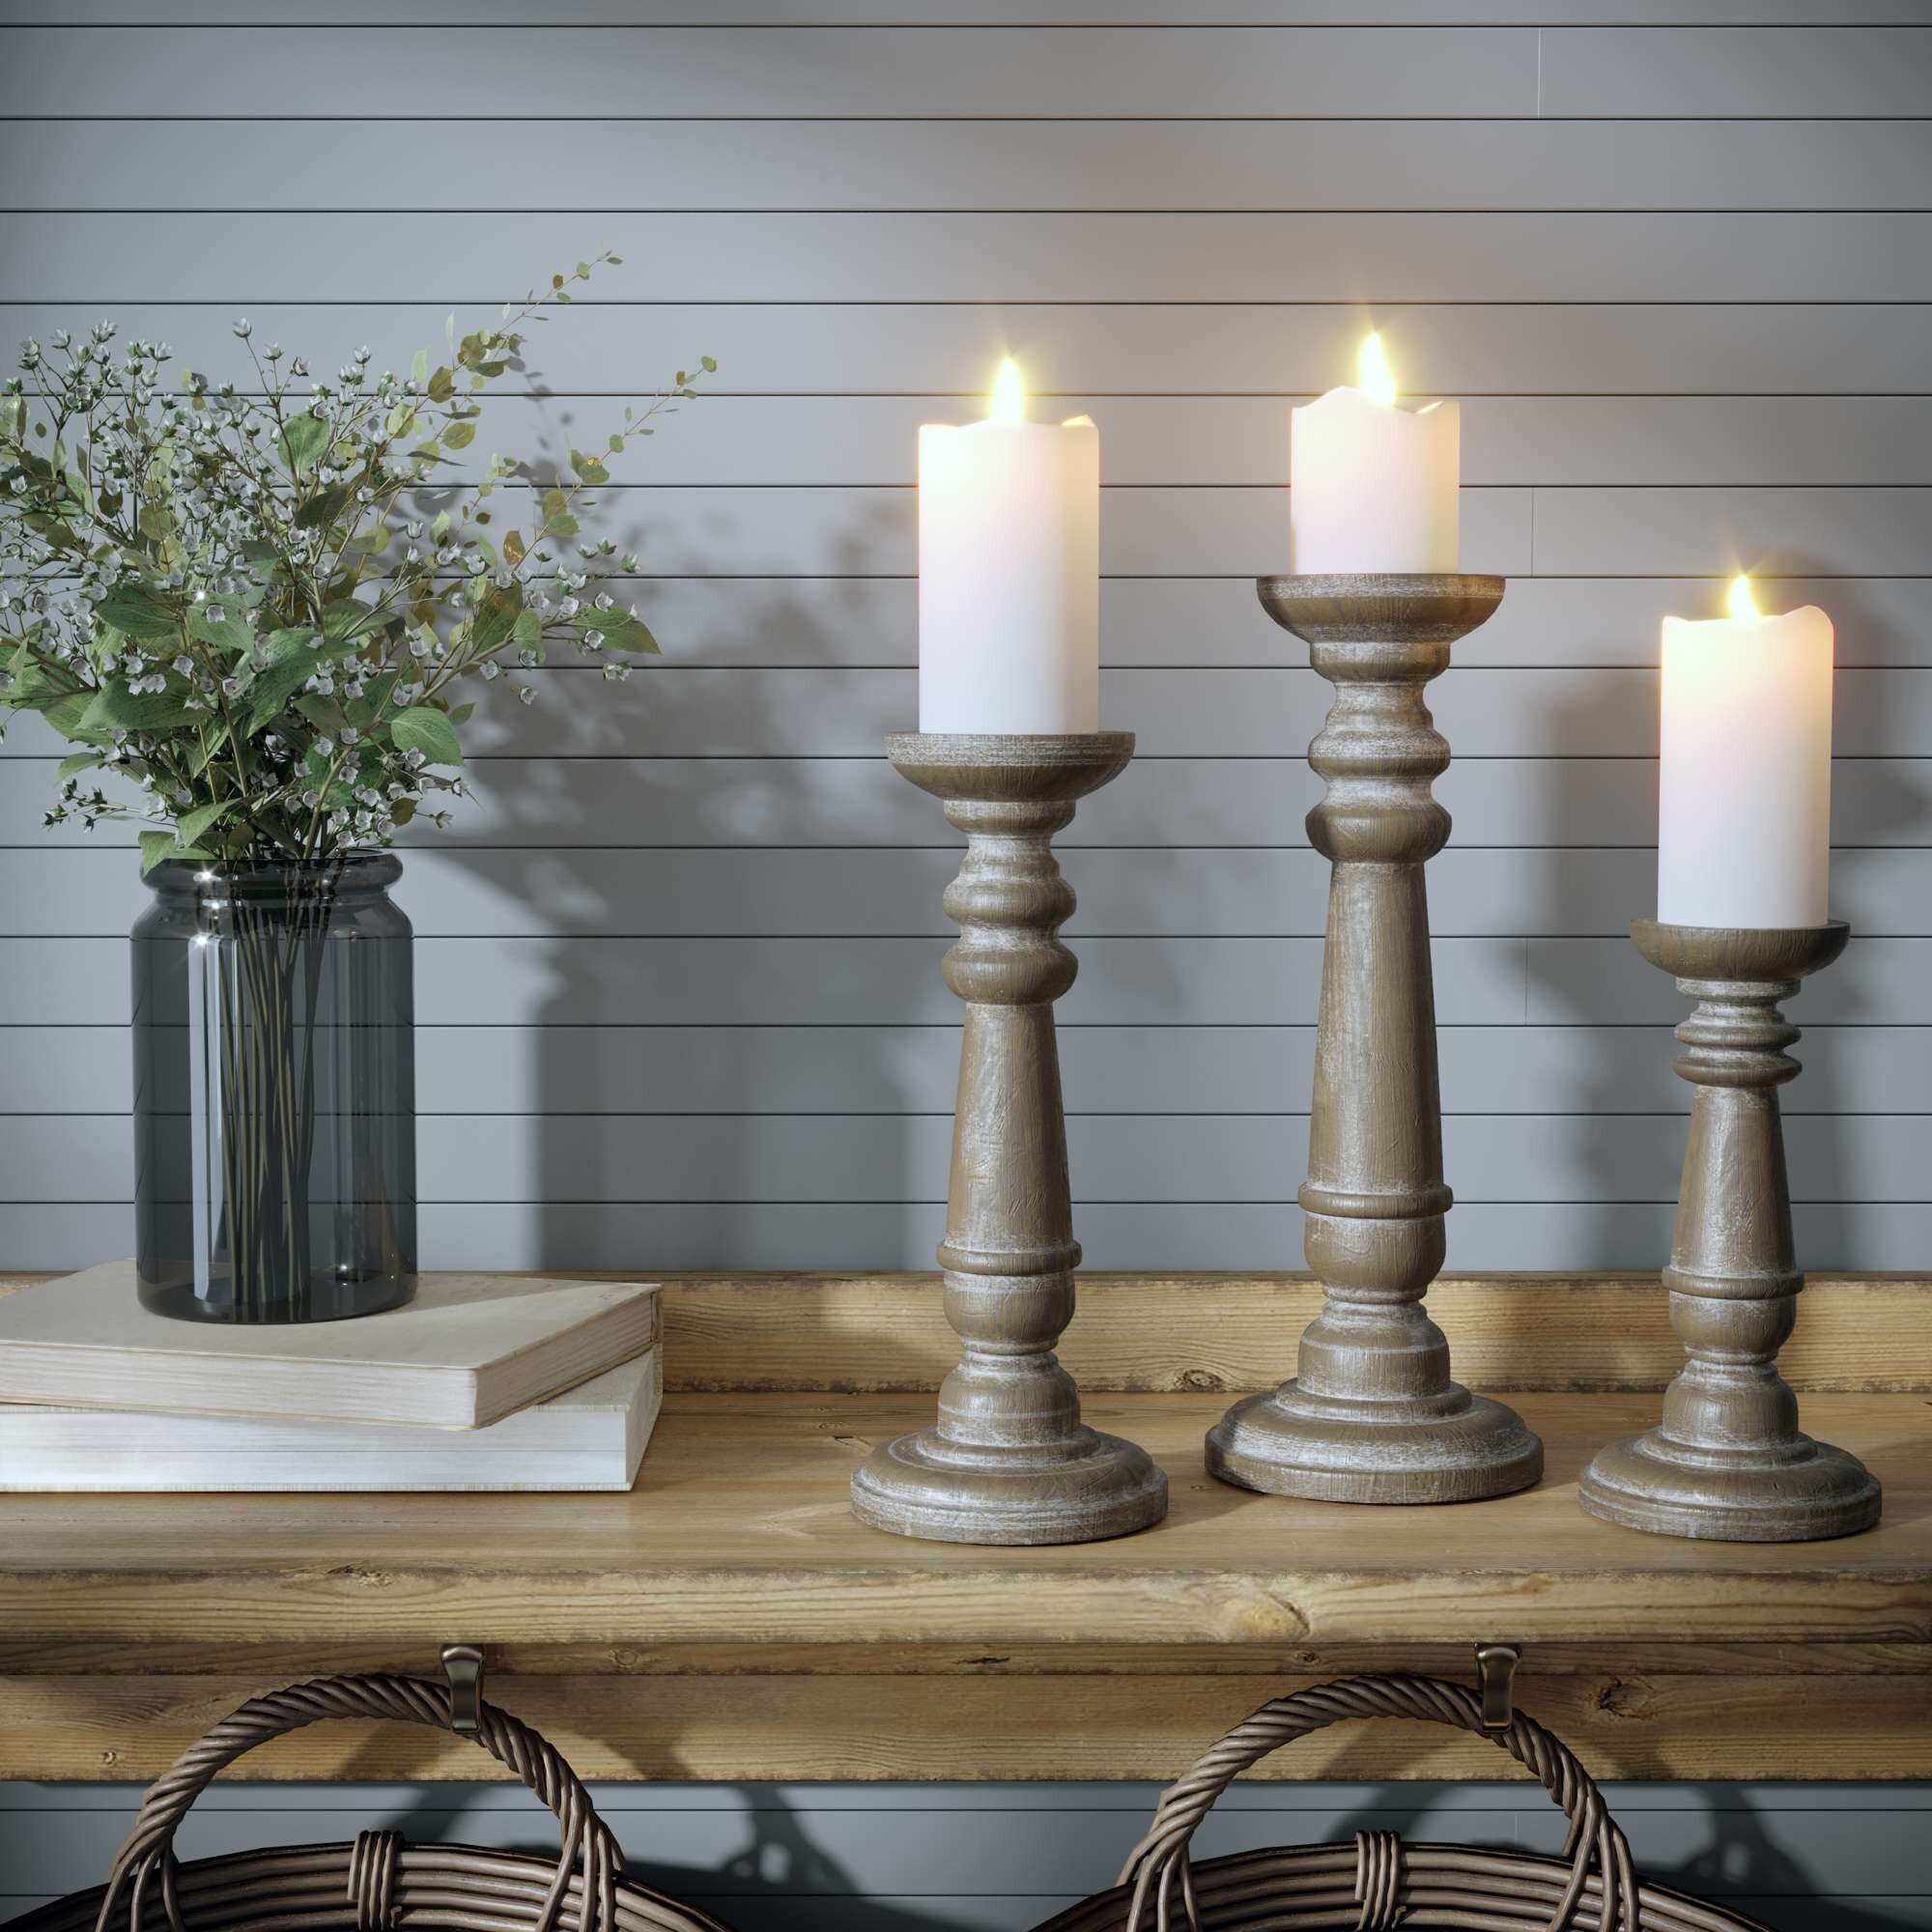 Set of 2 Large Rustic Pillar Candle Holder Candlesticks ~ Distressed White Wood 